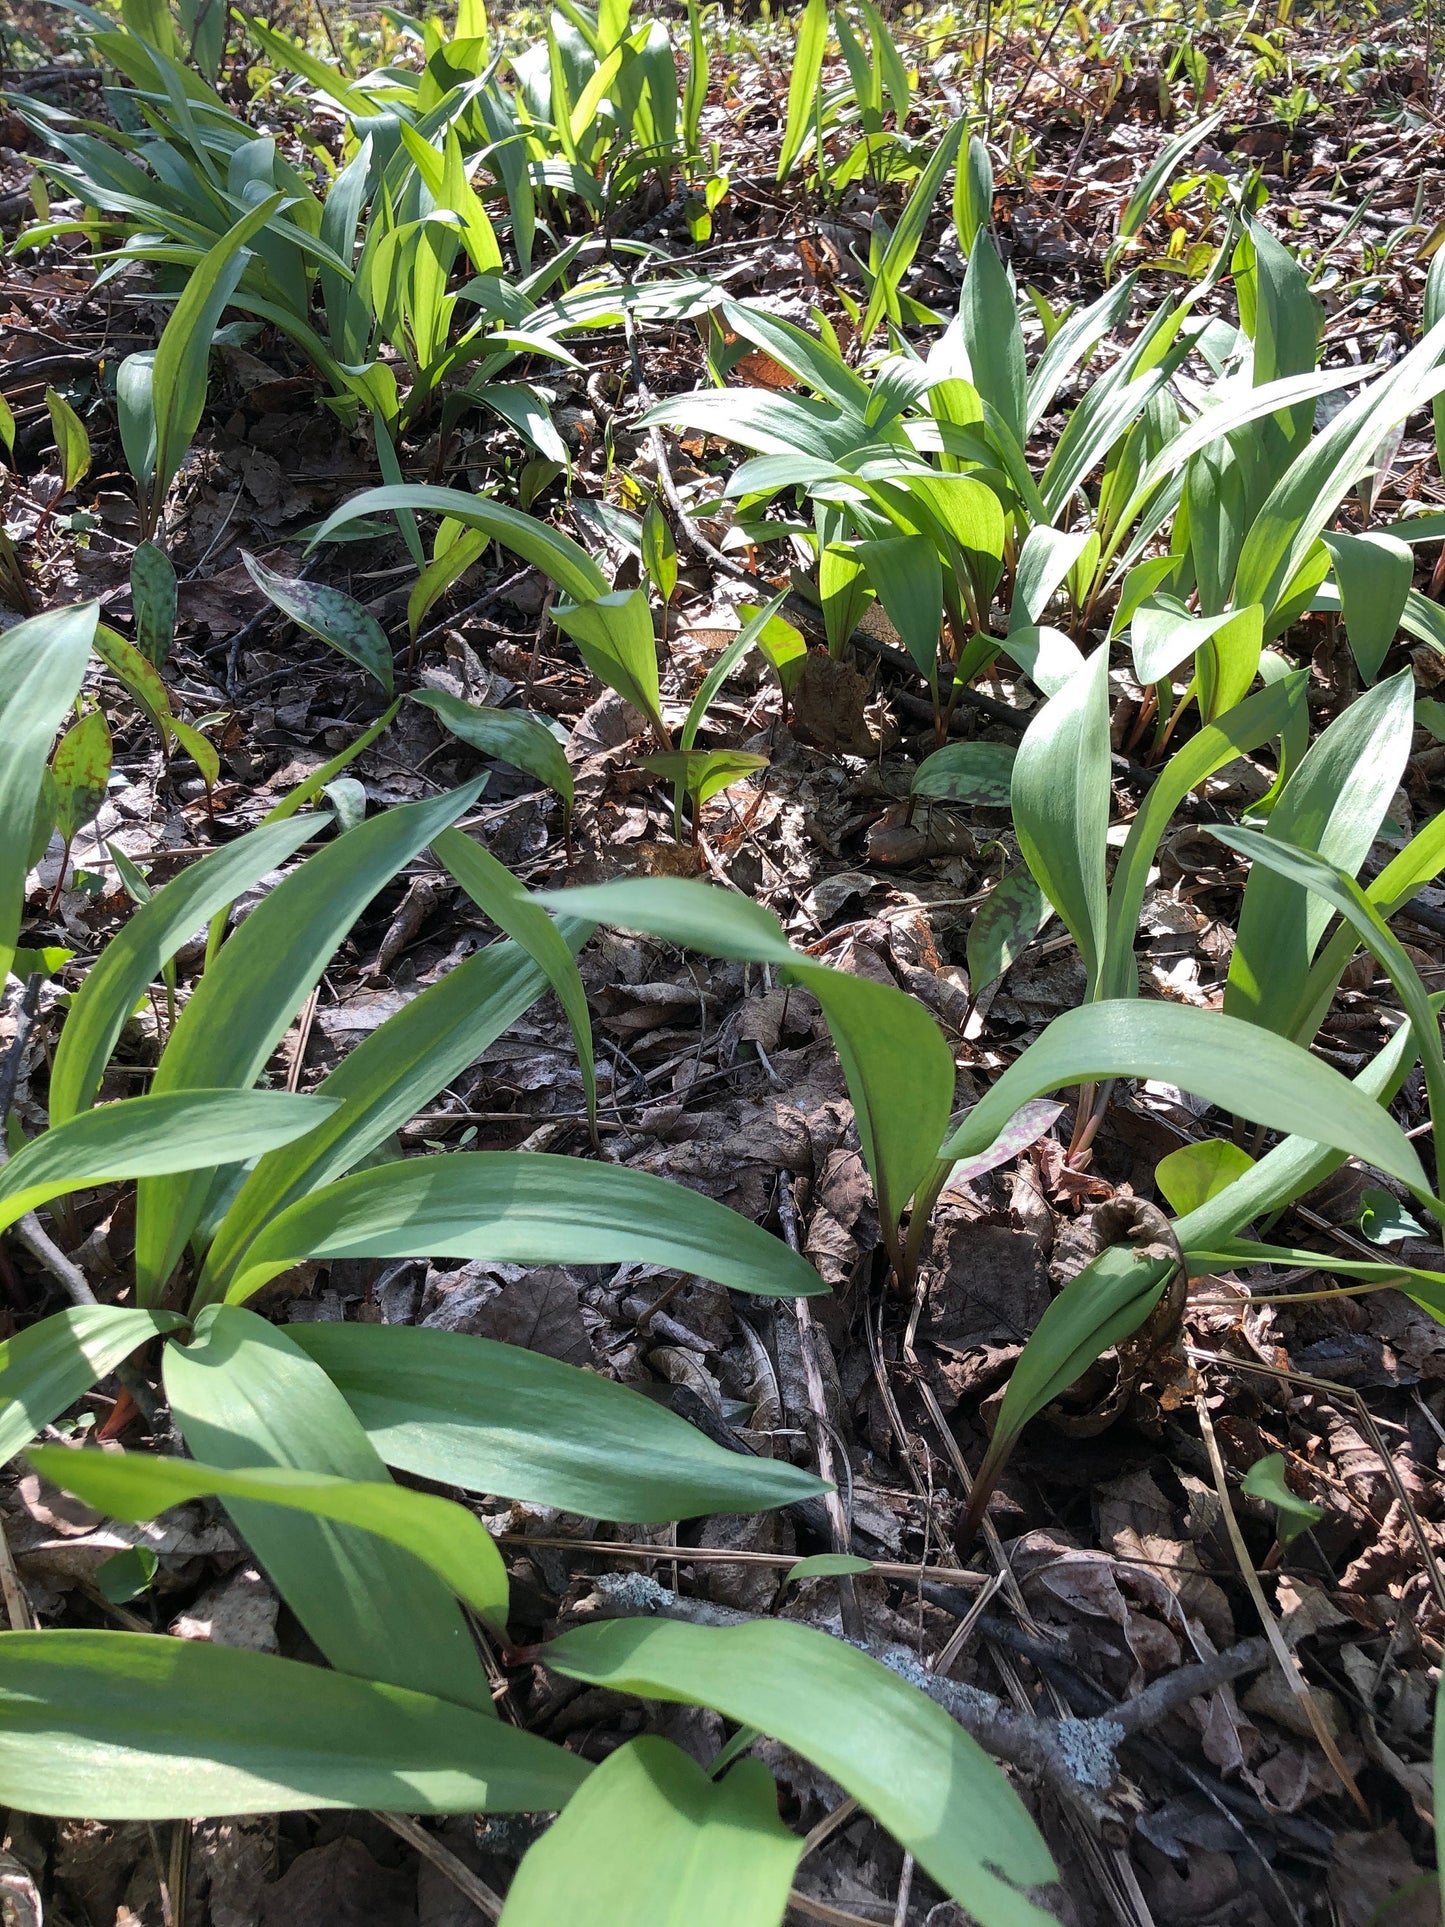 Ramp Bulbs (Allium tricoccum), Ethically and Sustainably Harvested